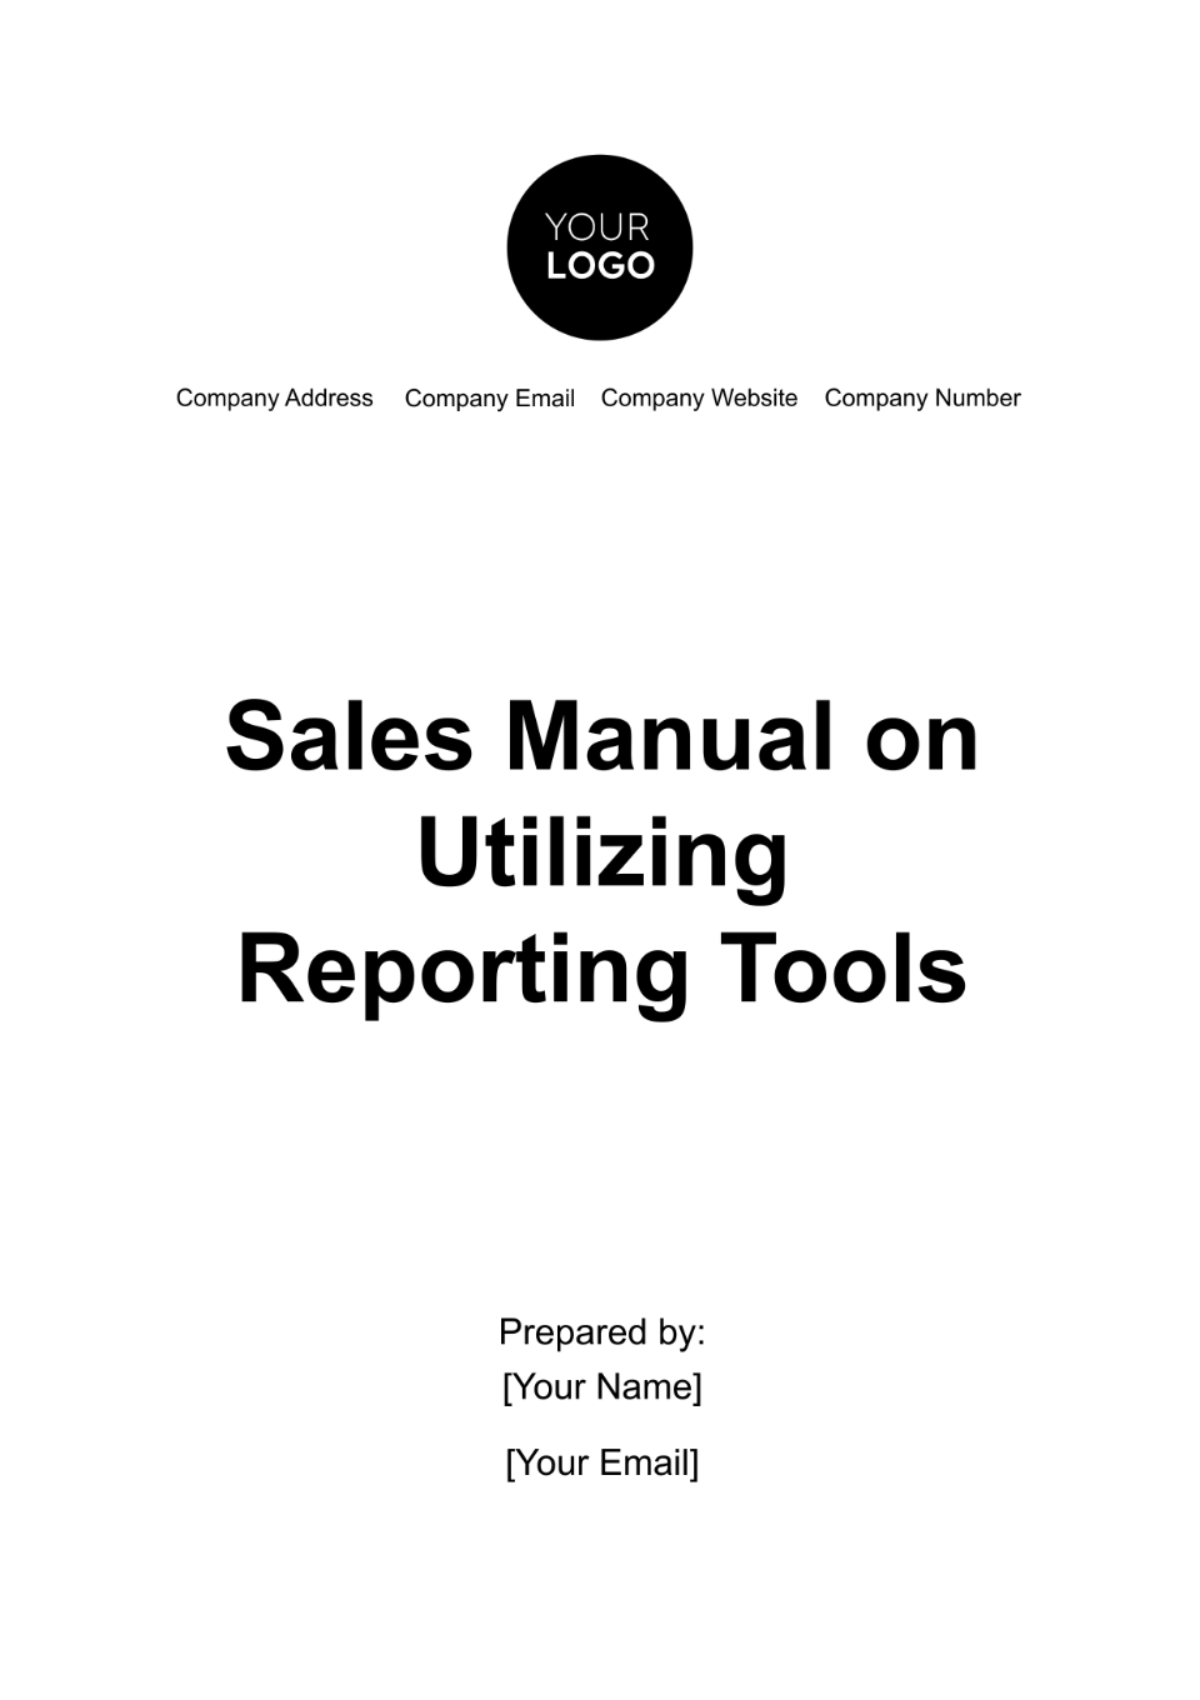 Free Sales Manual on Utilizing Reporting Tools Template